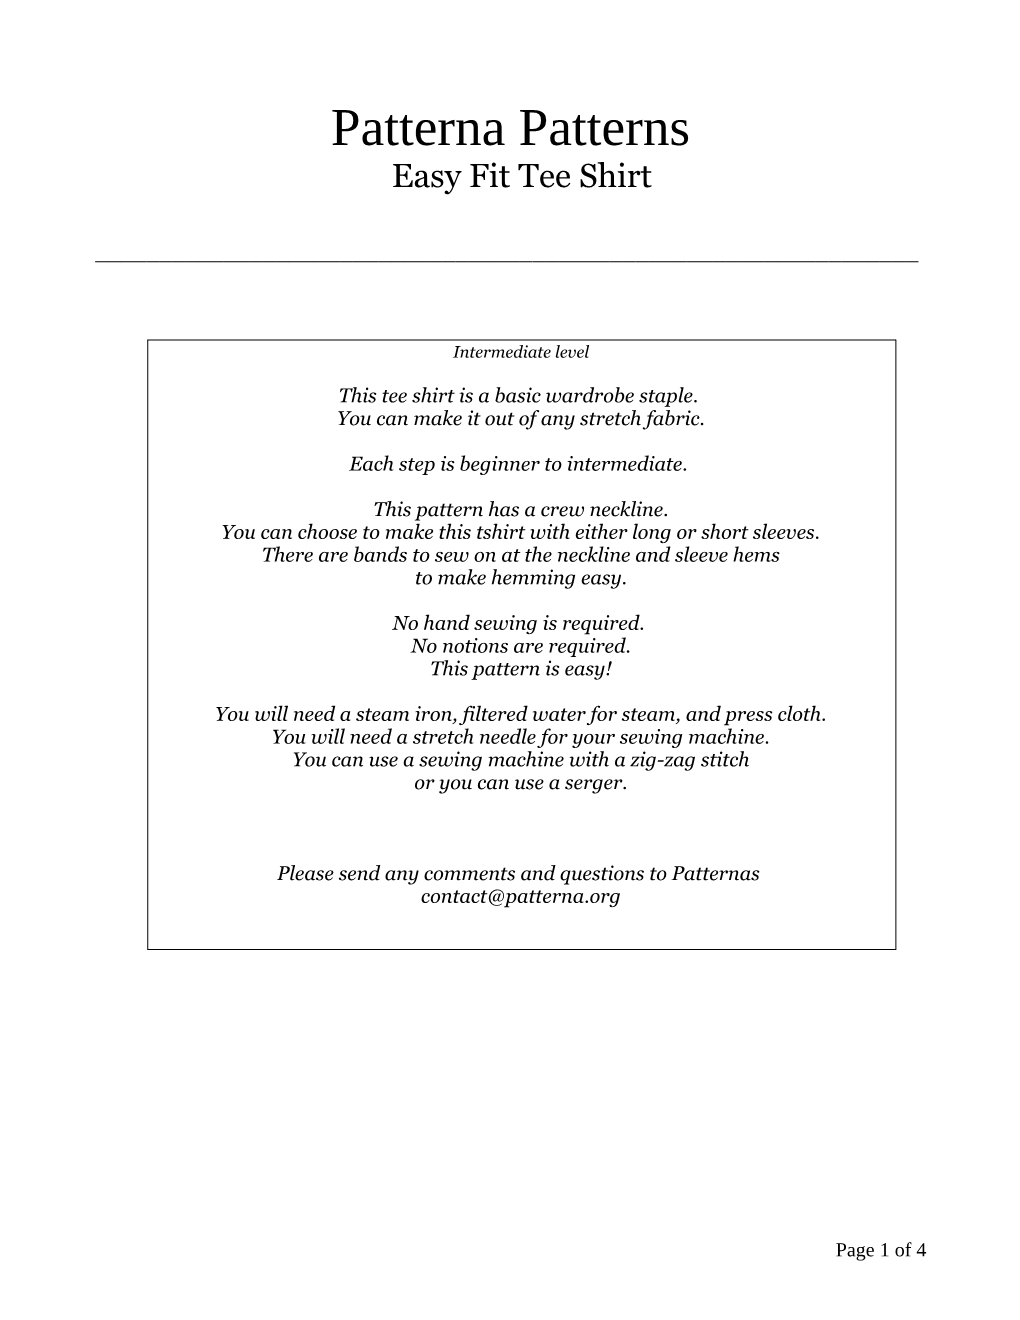 Patterna Patterns Easy Fit Tee Shirt